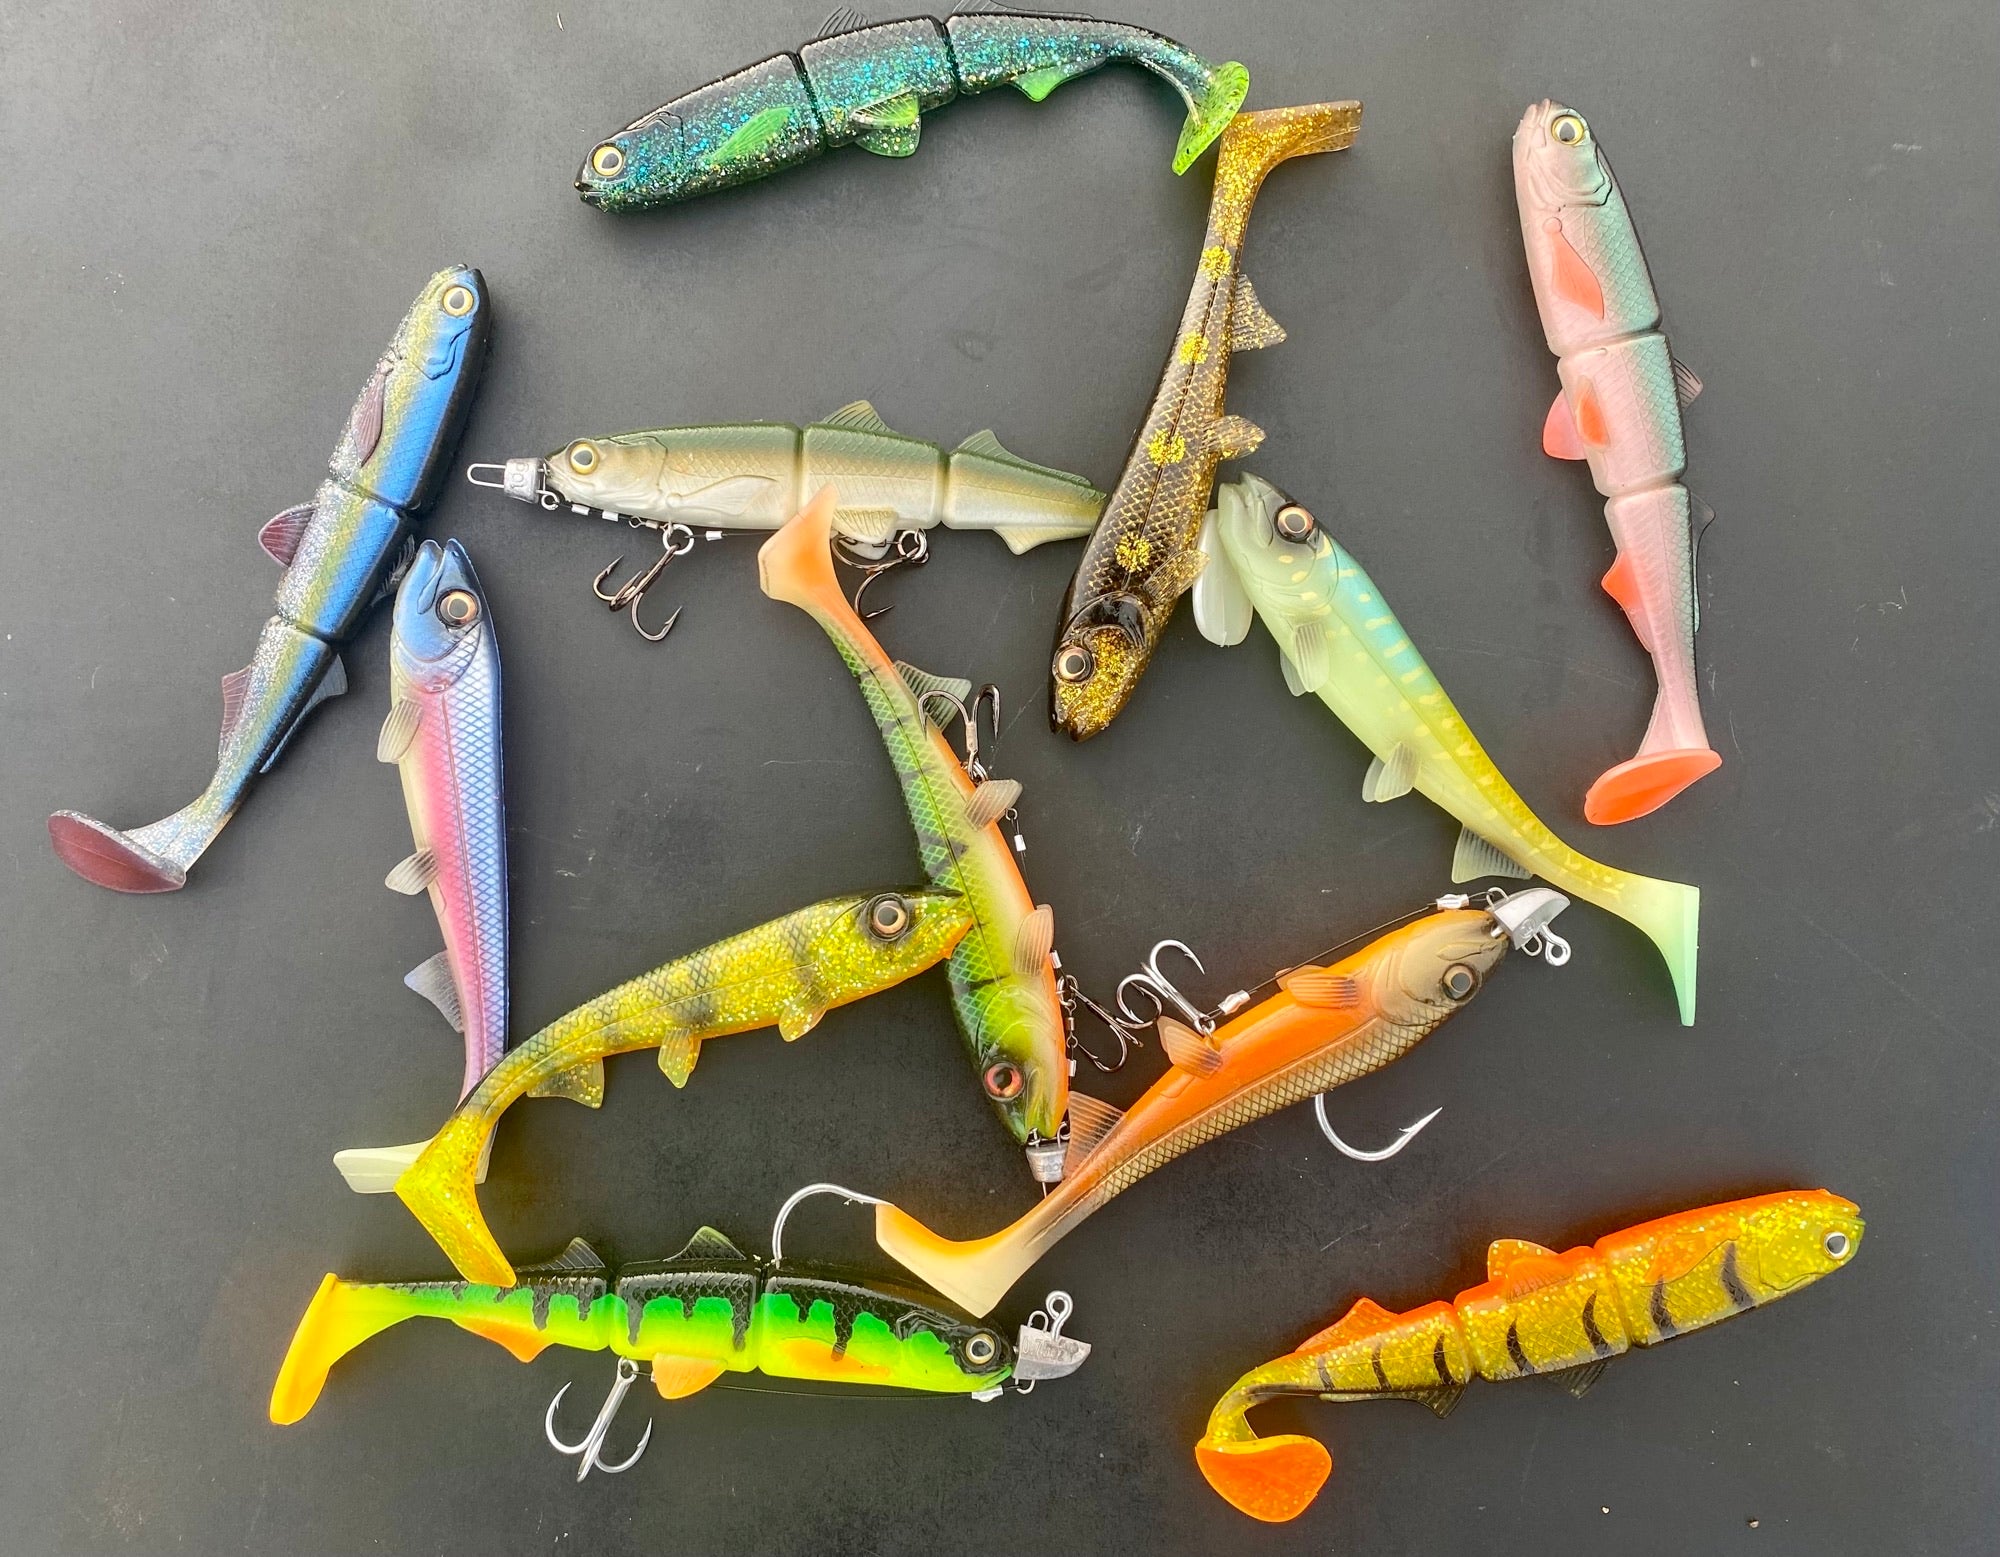 Drift 55g Shads Soft Lures - Poingdestres Angling Centre